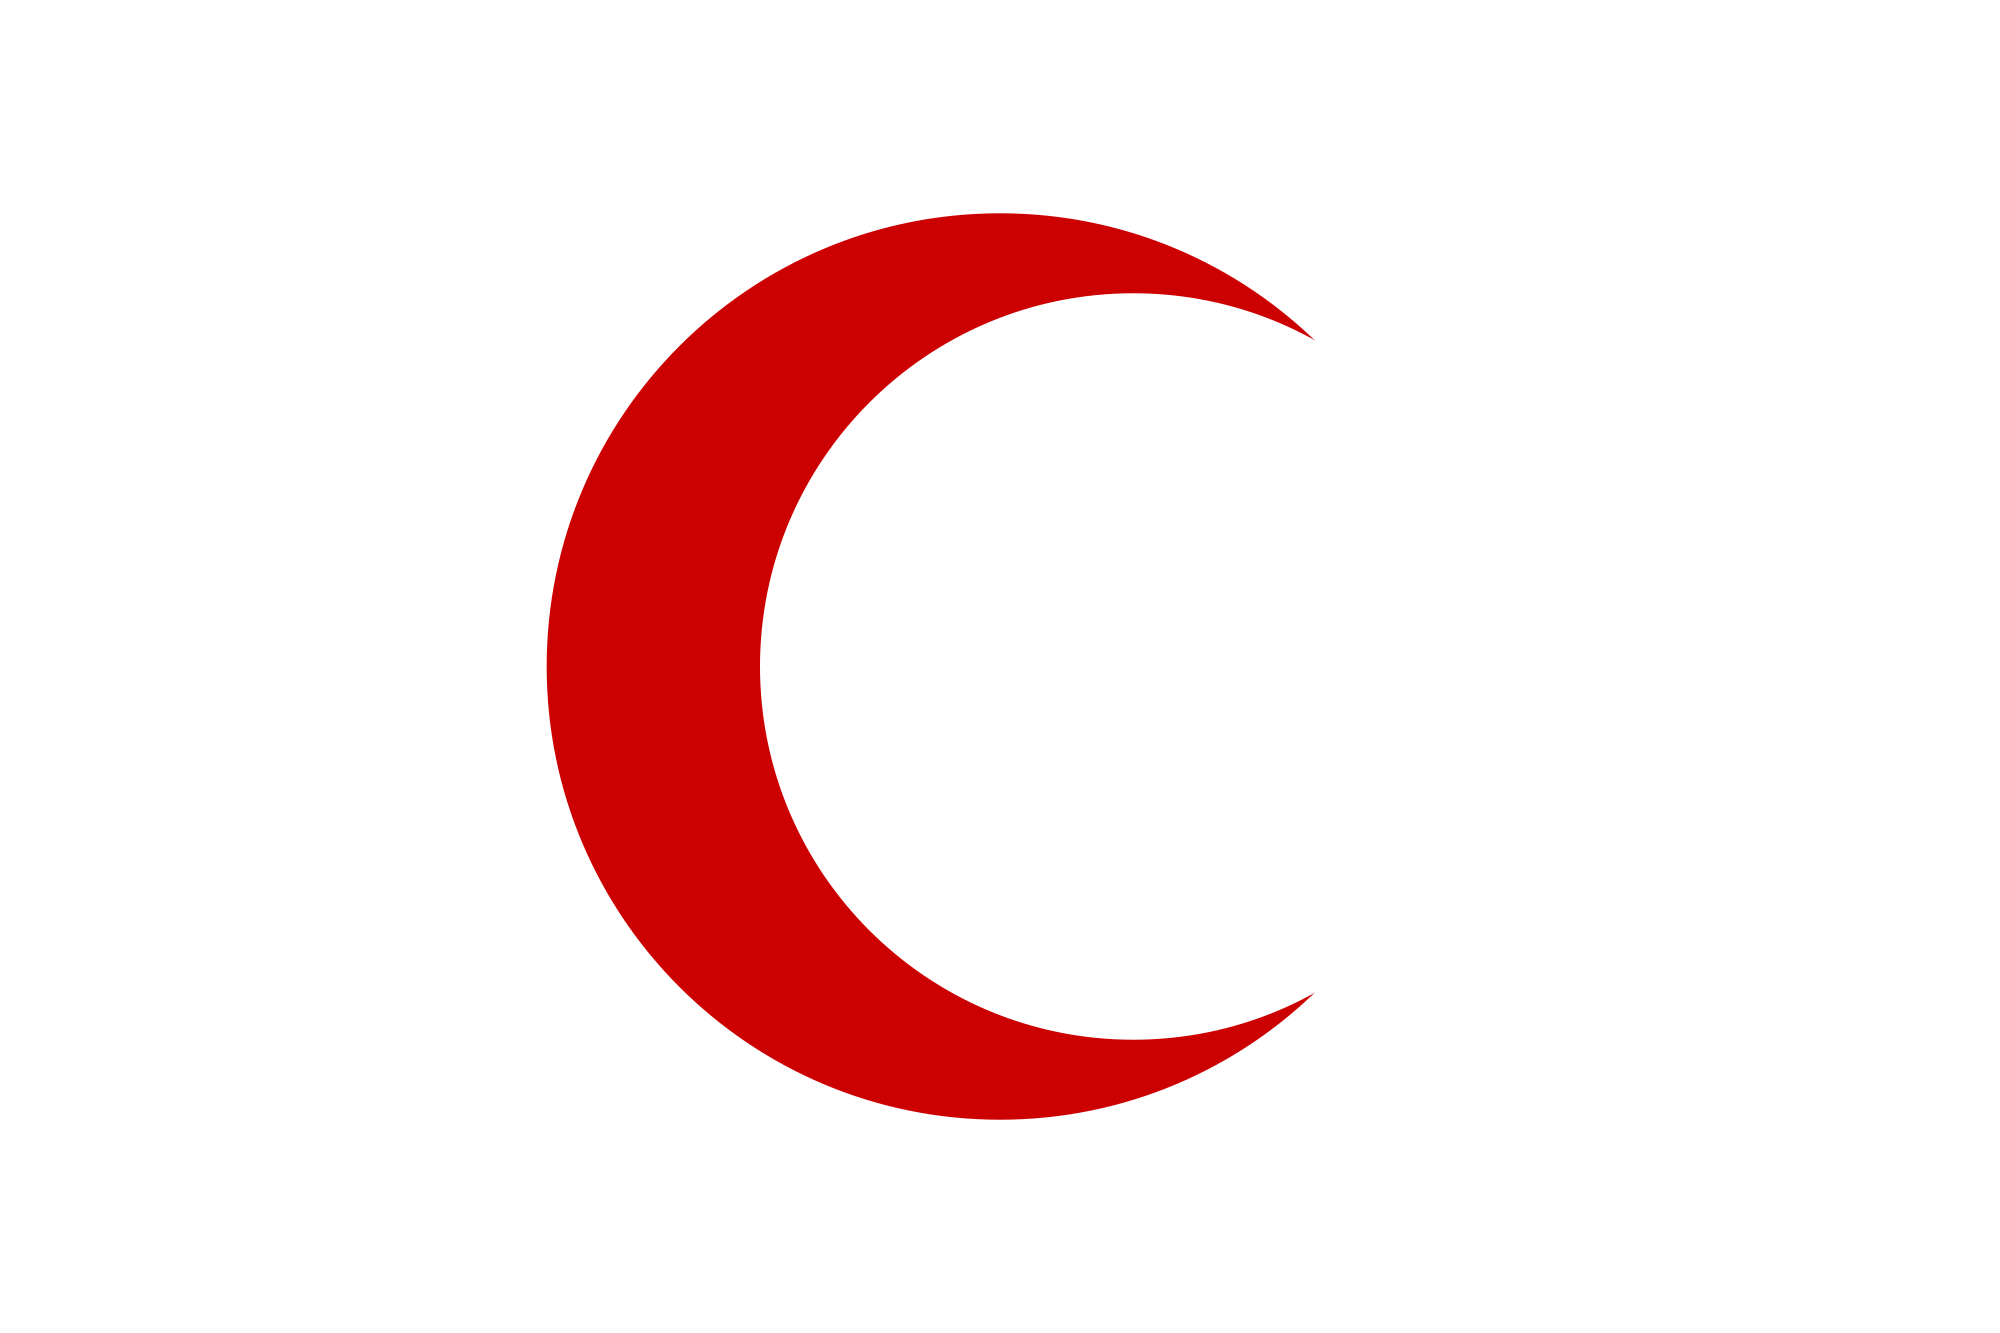 Red Crescent Logo - Emblems of the International Red Cross and Red Crescent Movement ...